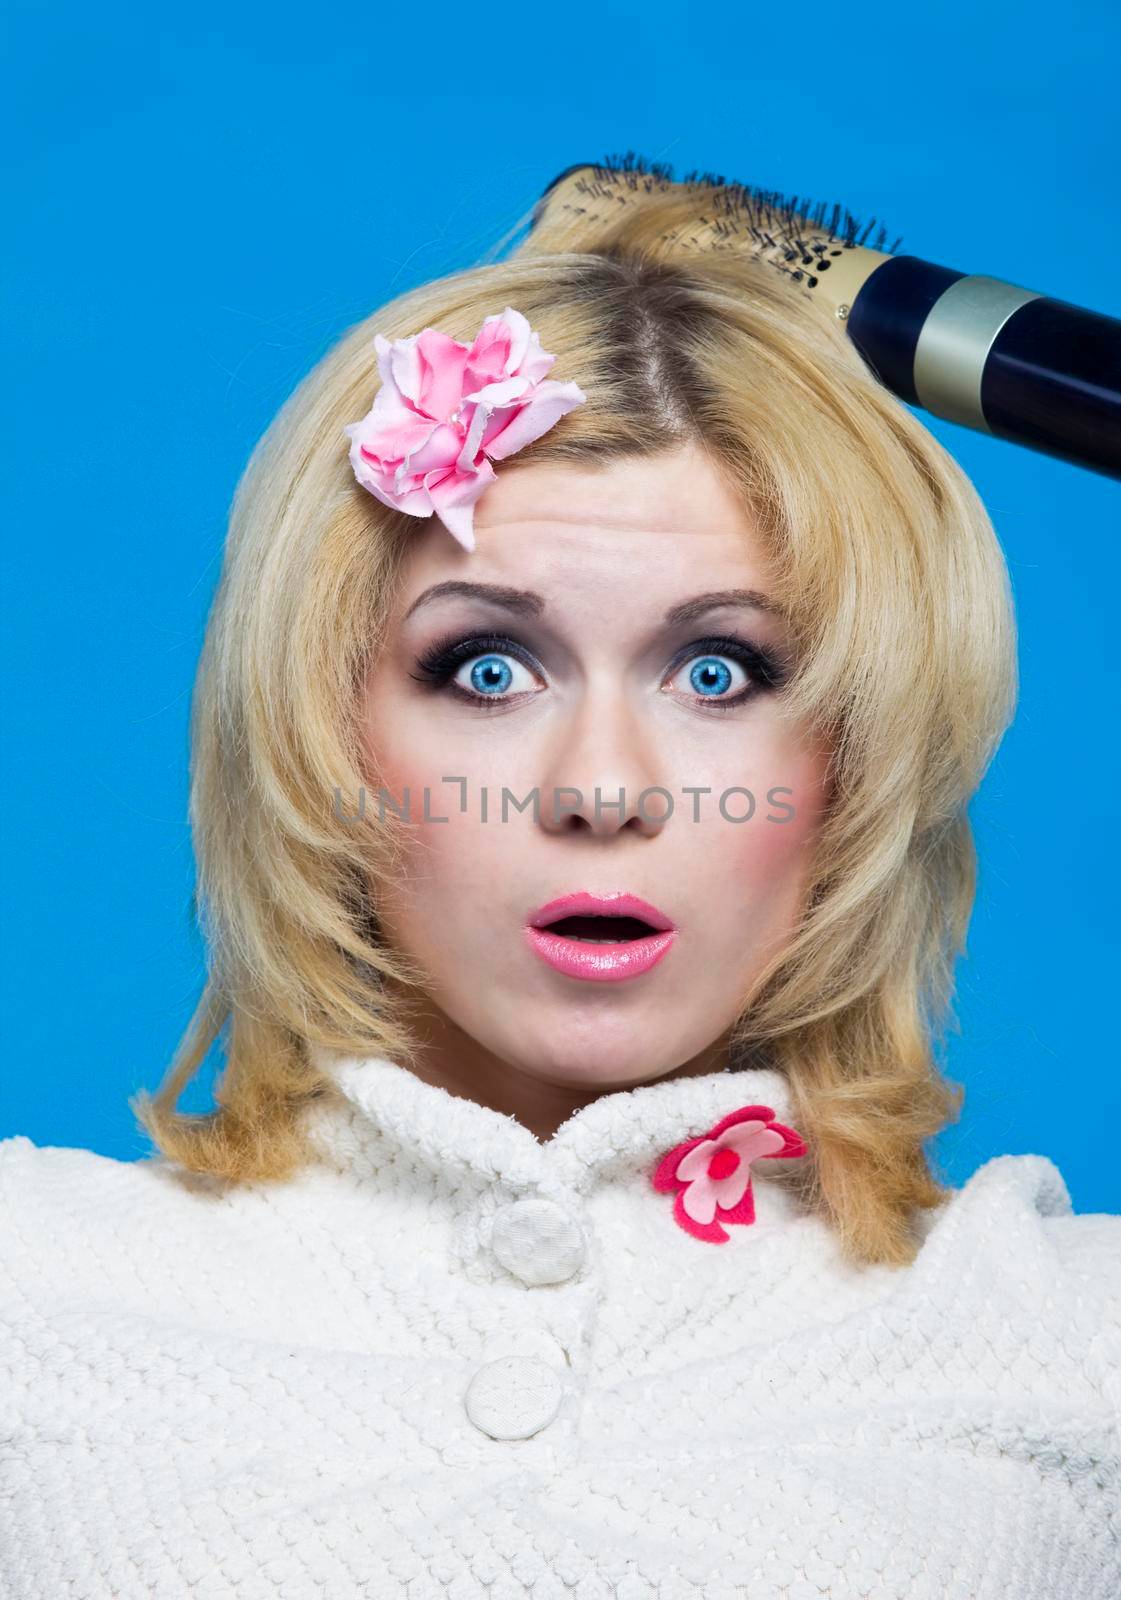 Young blond with hairdryer studio shot pin-up style